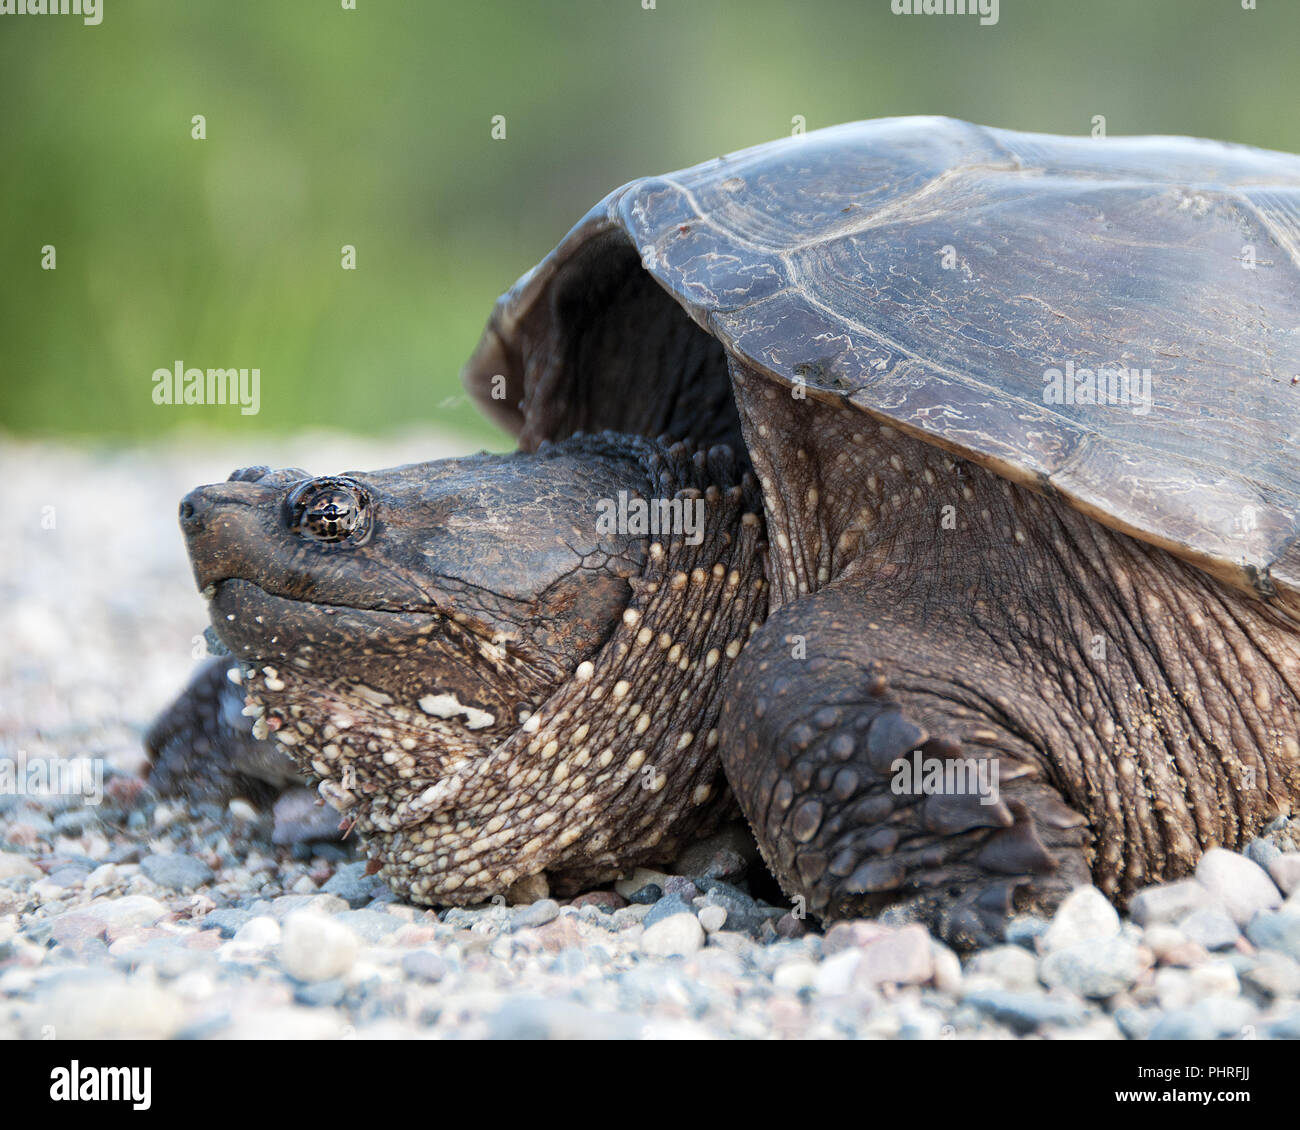 Snapping turtle close up in its environment. Stock Photo